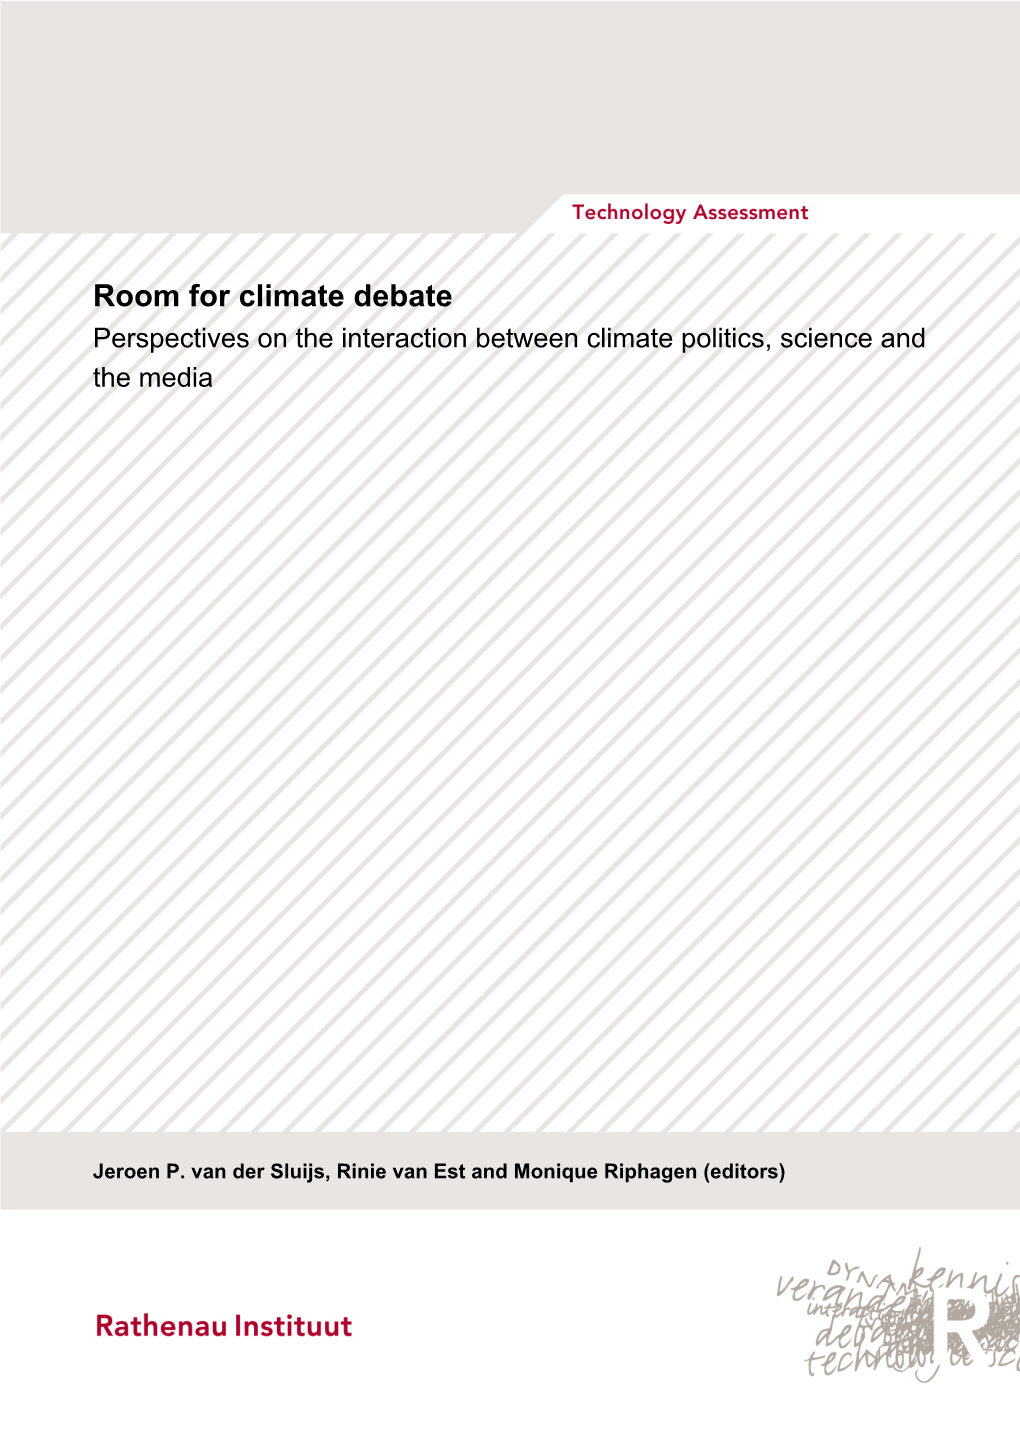 Room for Climate Debate Perspectives on the Interaction Between Climate Politics, Science and the Media